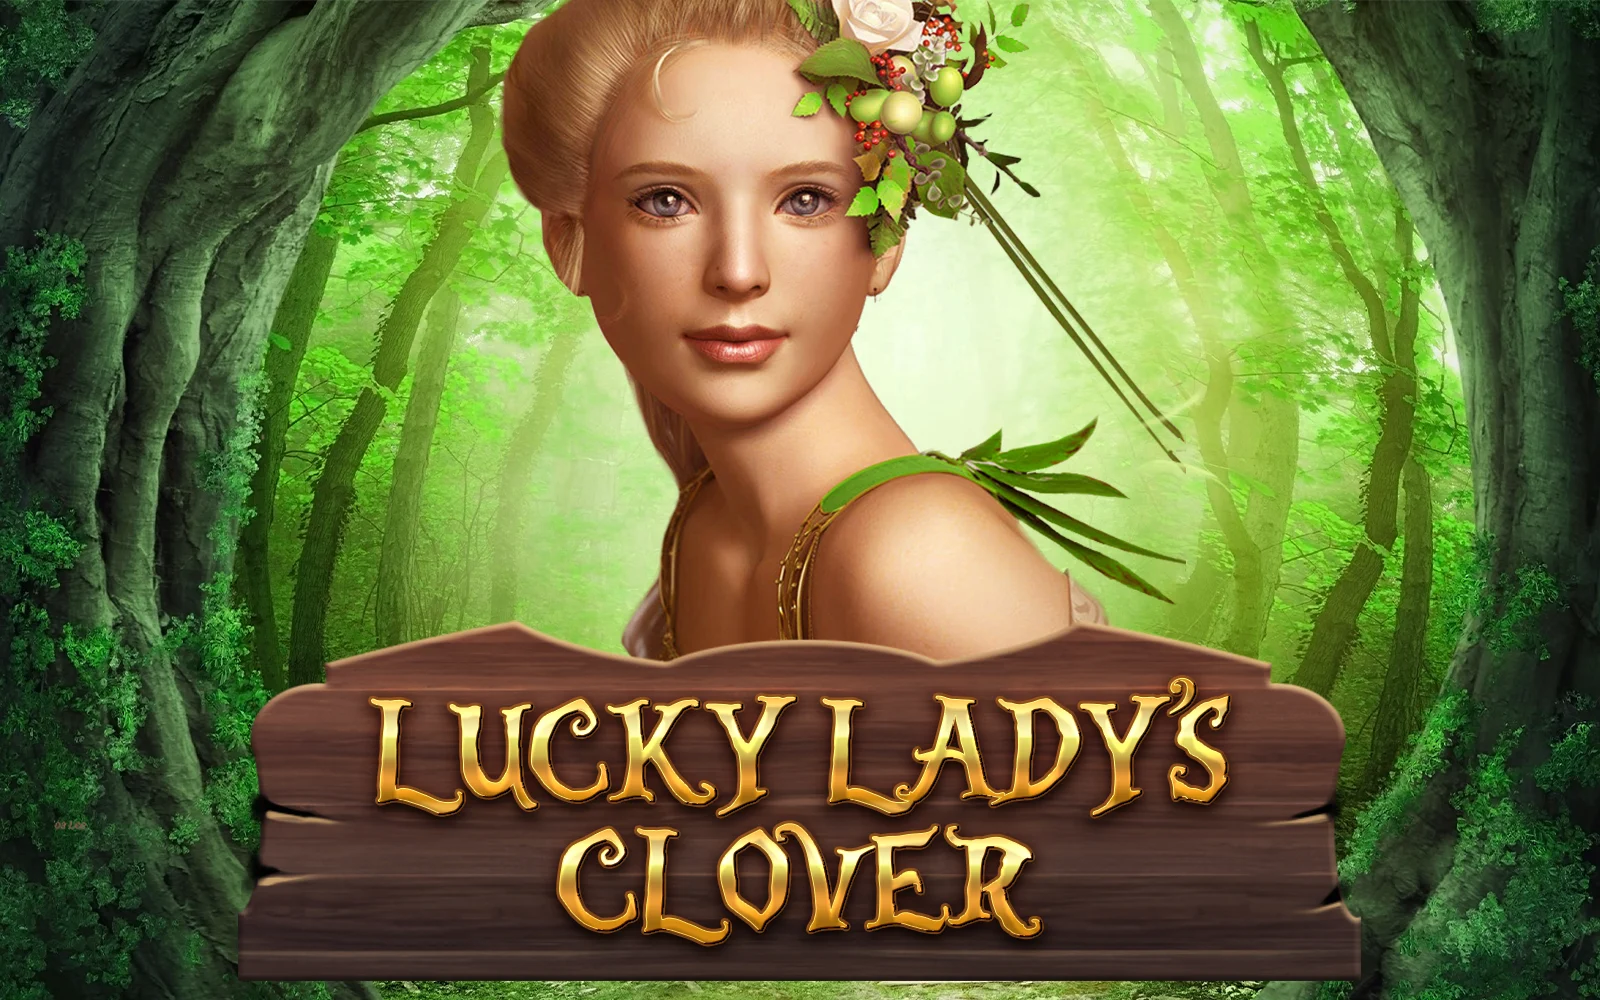 Play Lucky Lady's Clover on Starcasino.be online casino